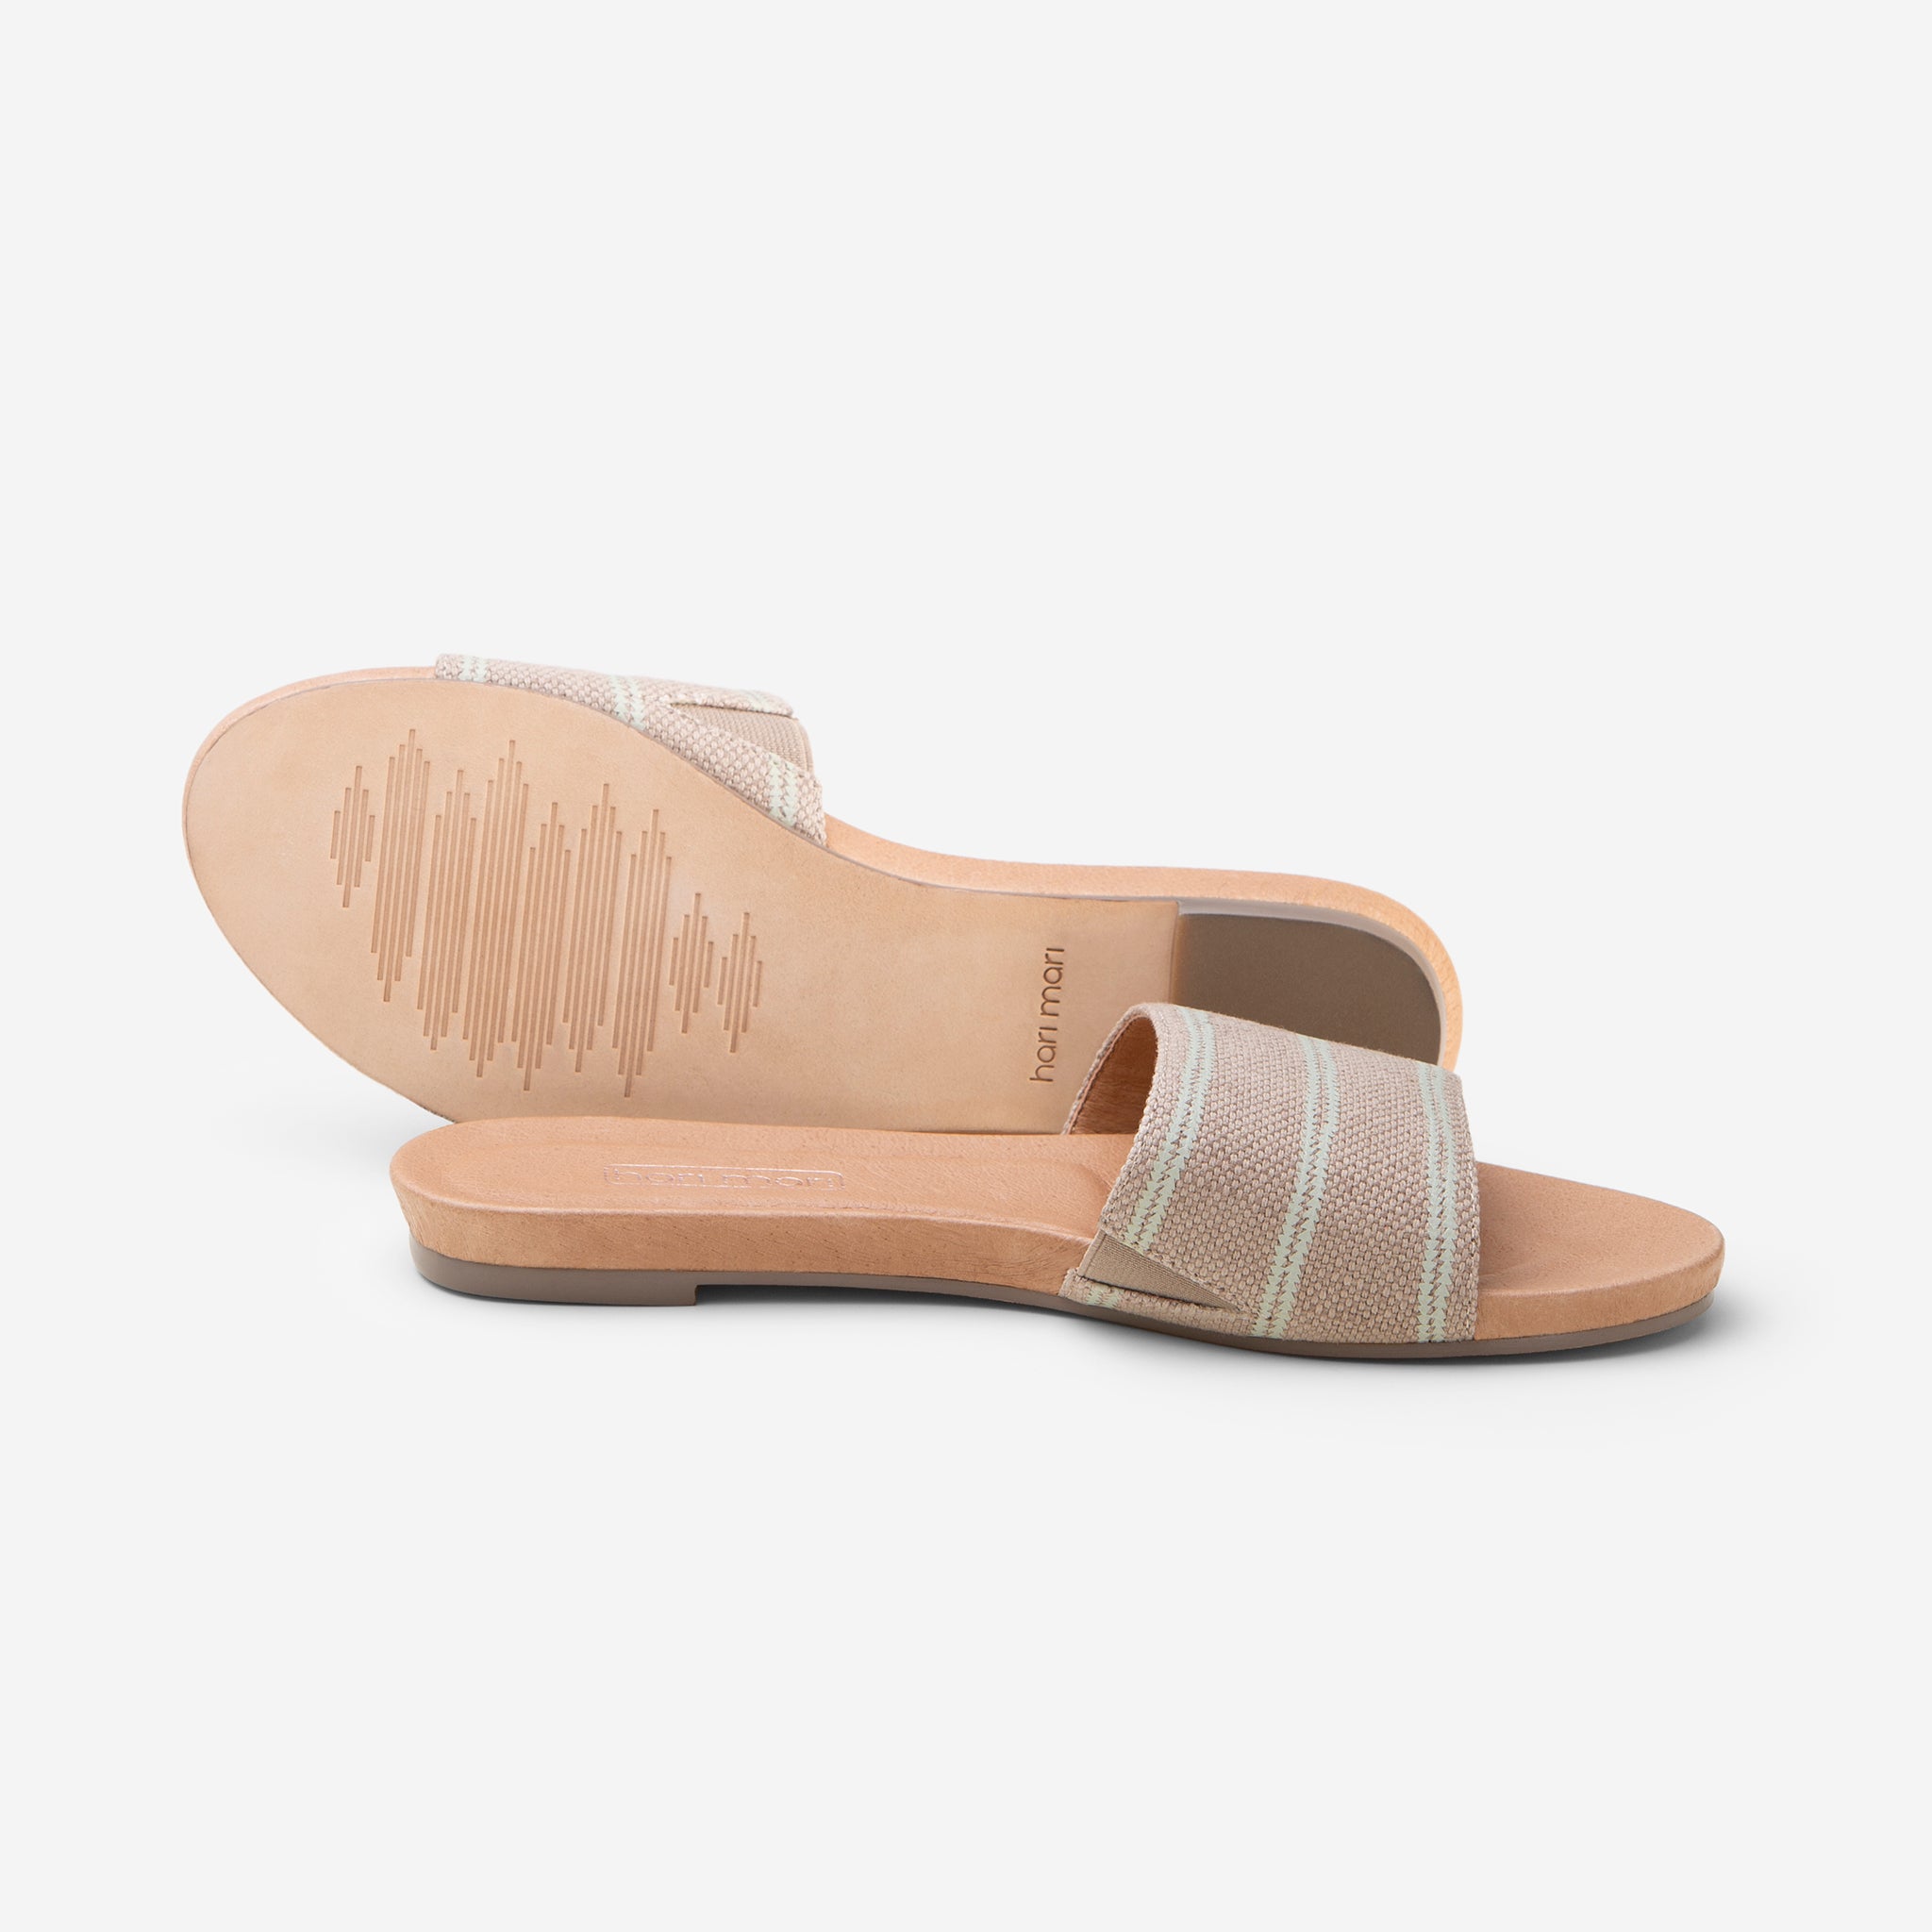 Hari Mari Sydney Woven Sandal in Natural on white background showing sandal and bottom of sandal genuine leather outsole